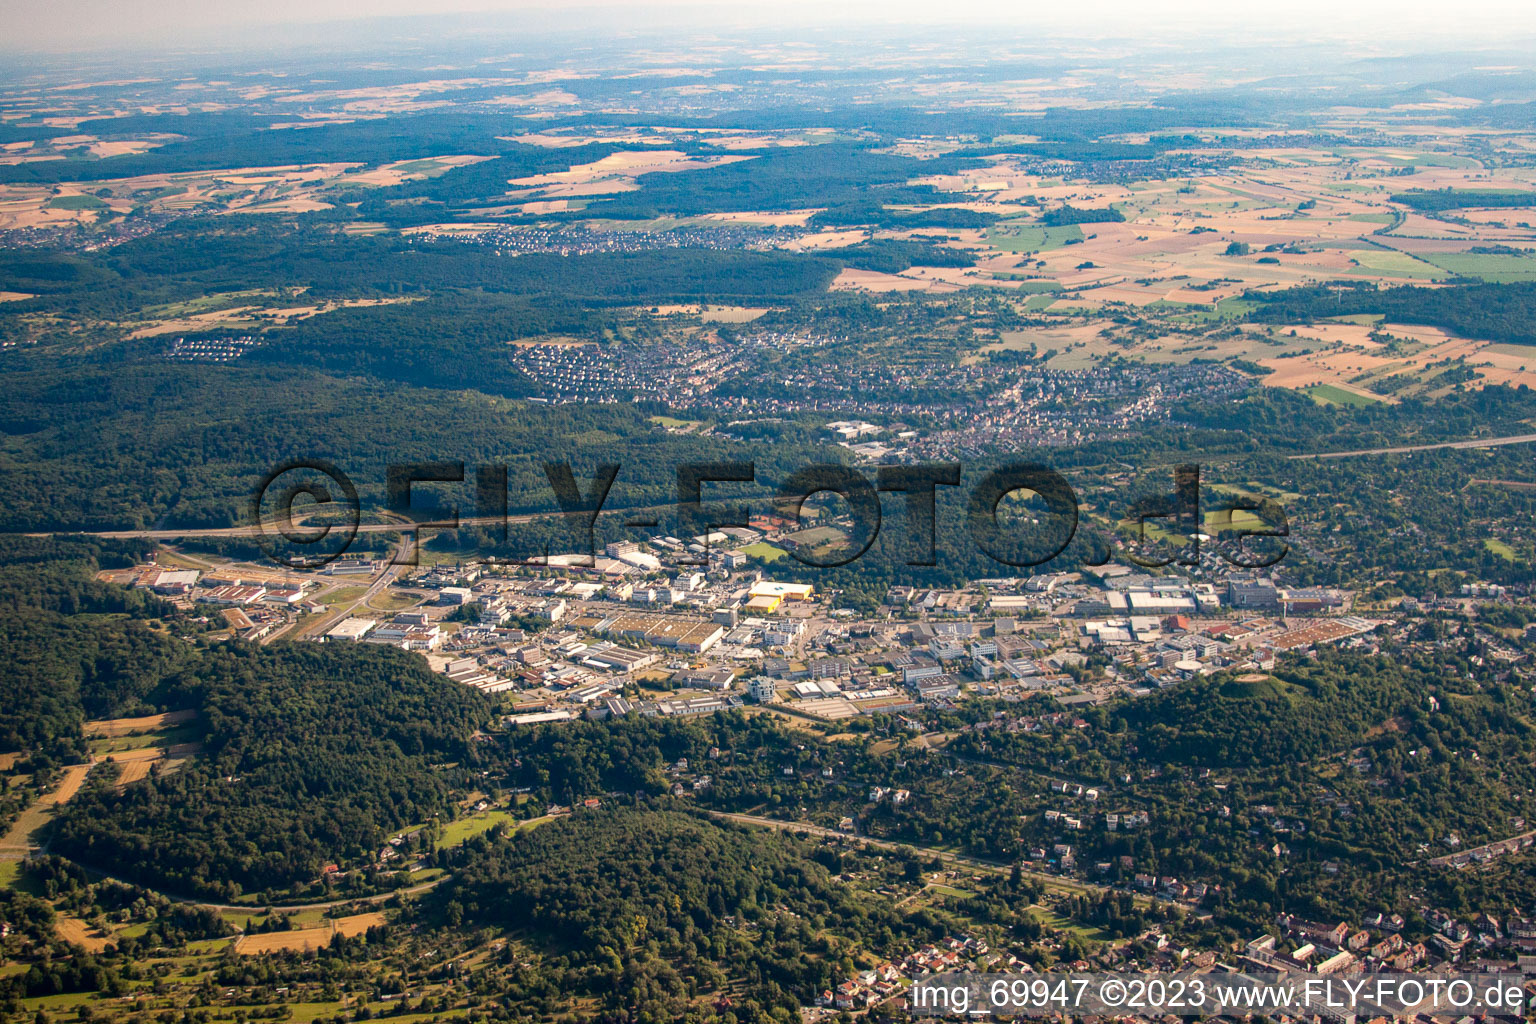 Pforzheim in the state Baden-Wuerttemberg, Germany seen from a drone